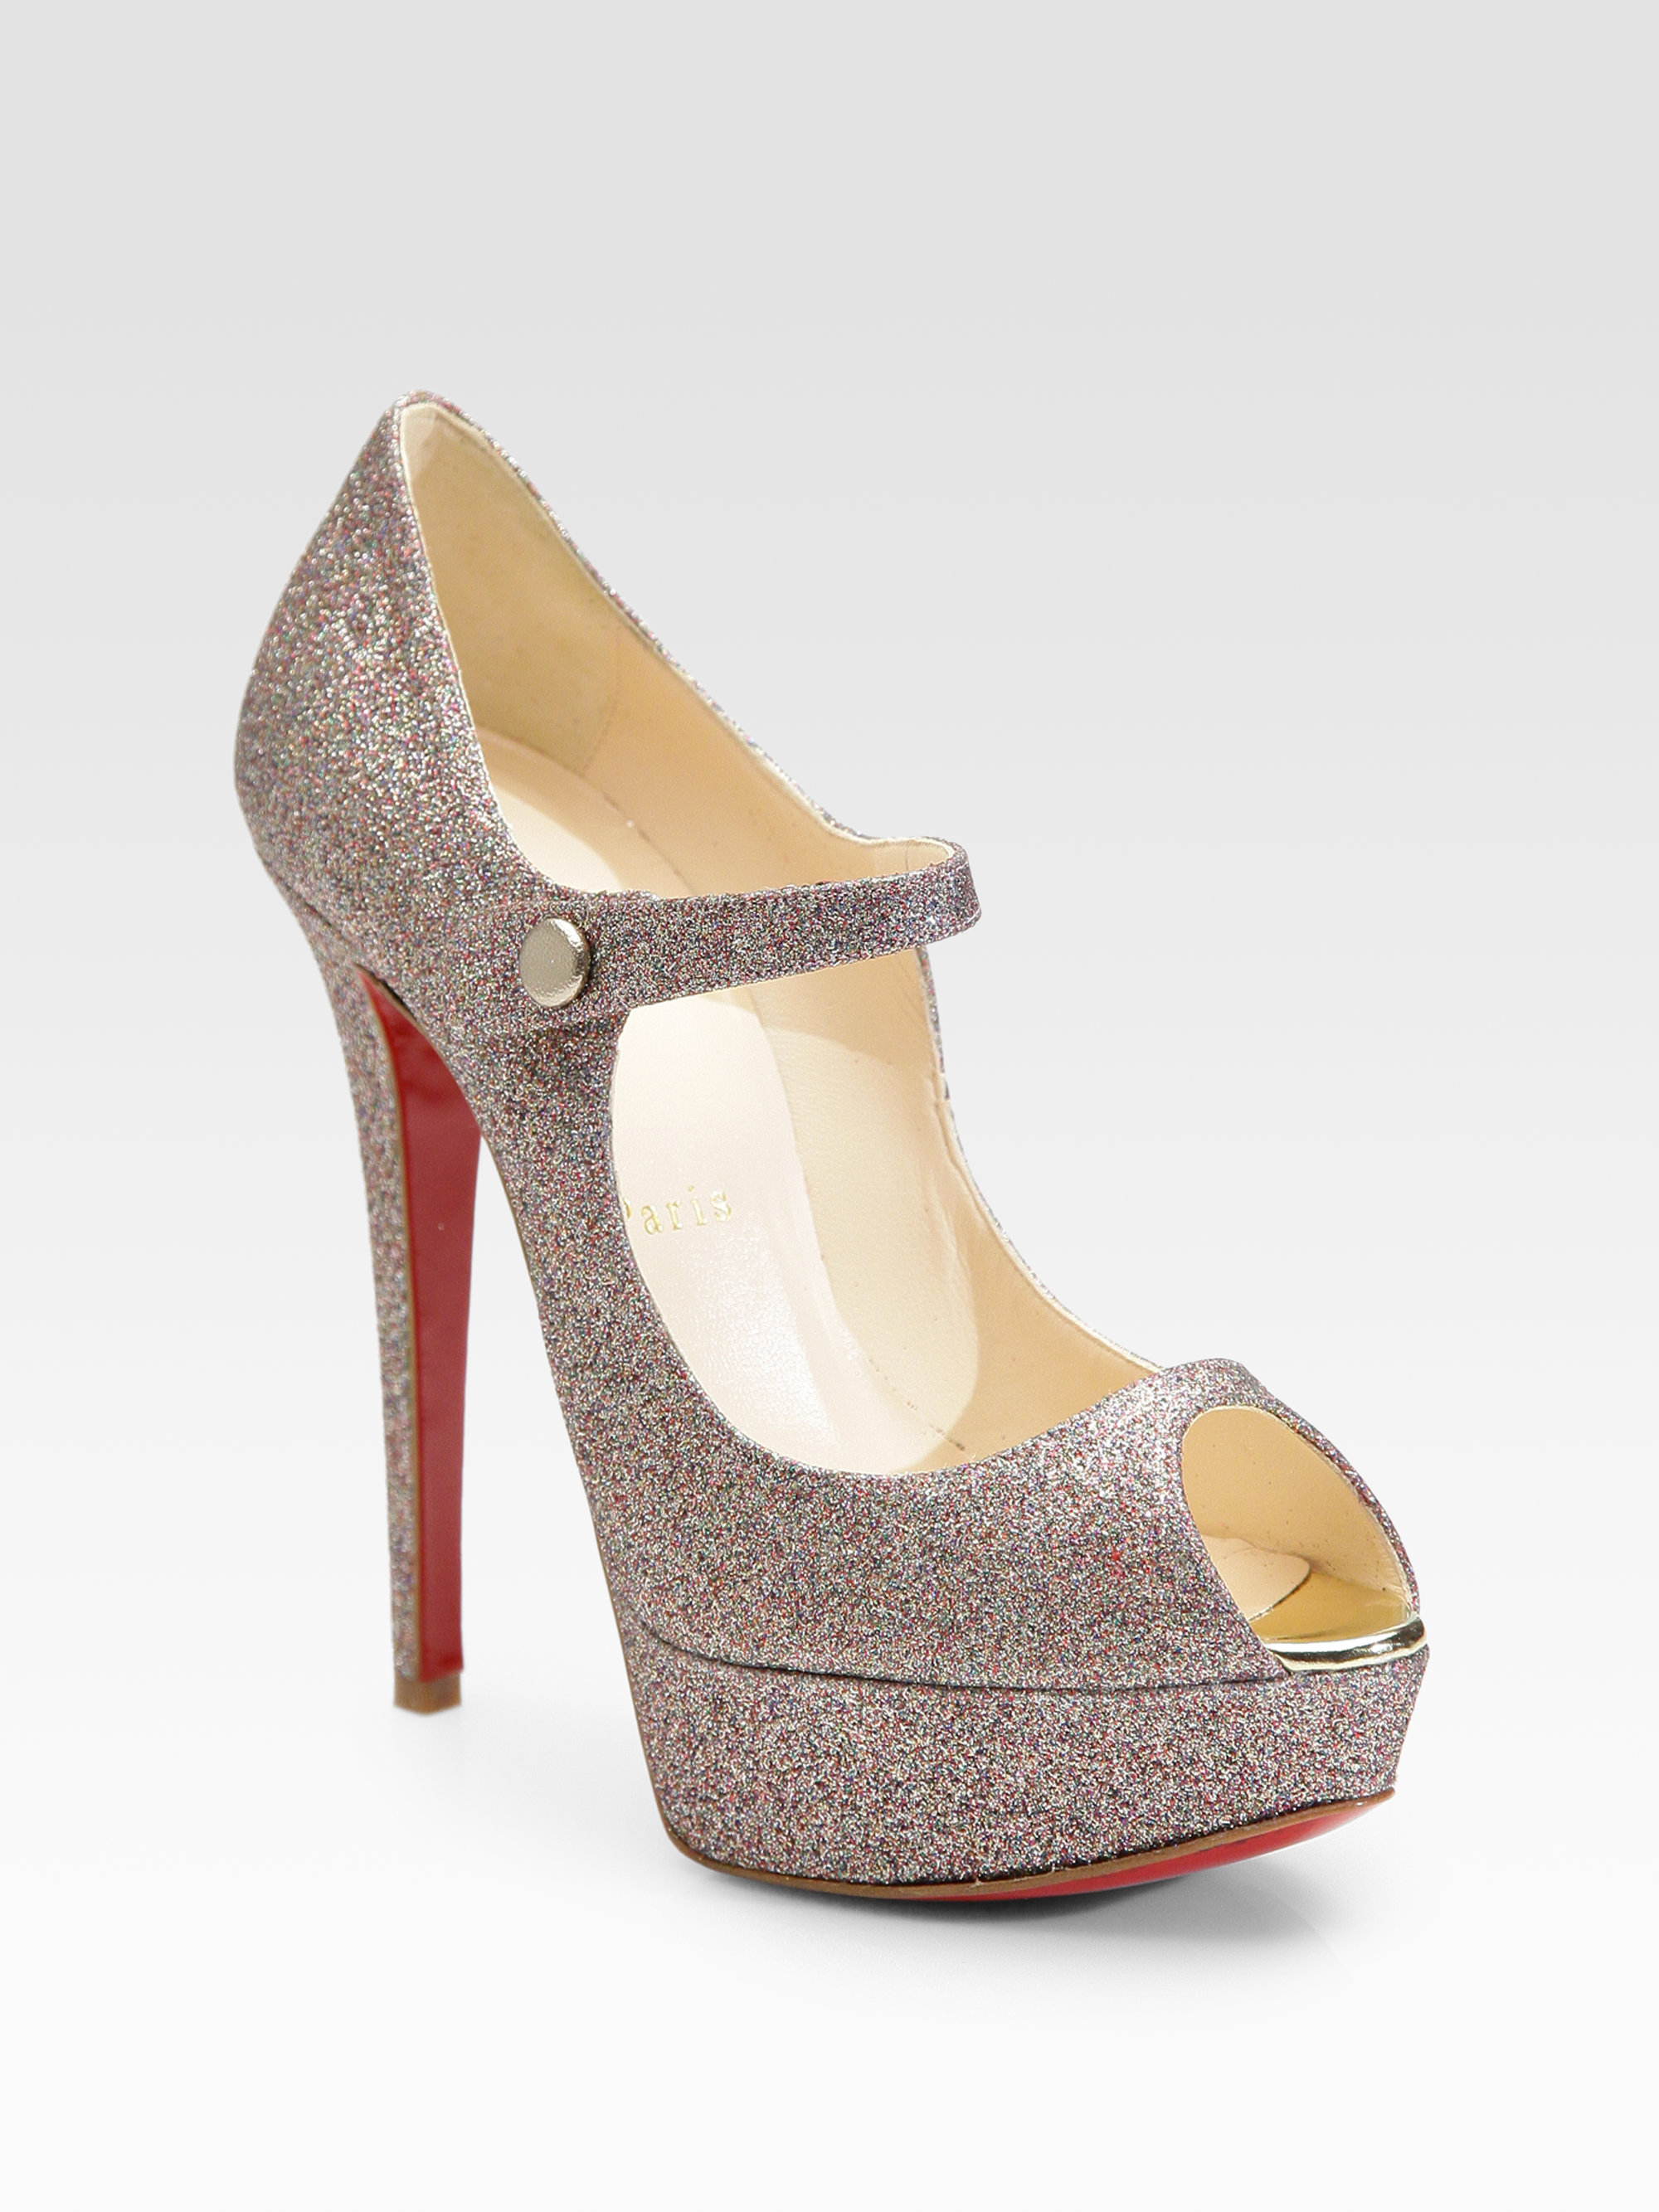 sparkly louboutins